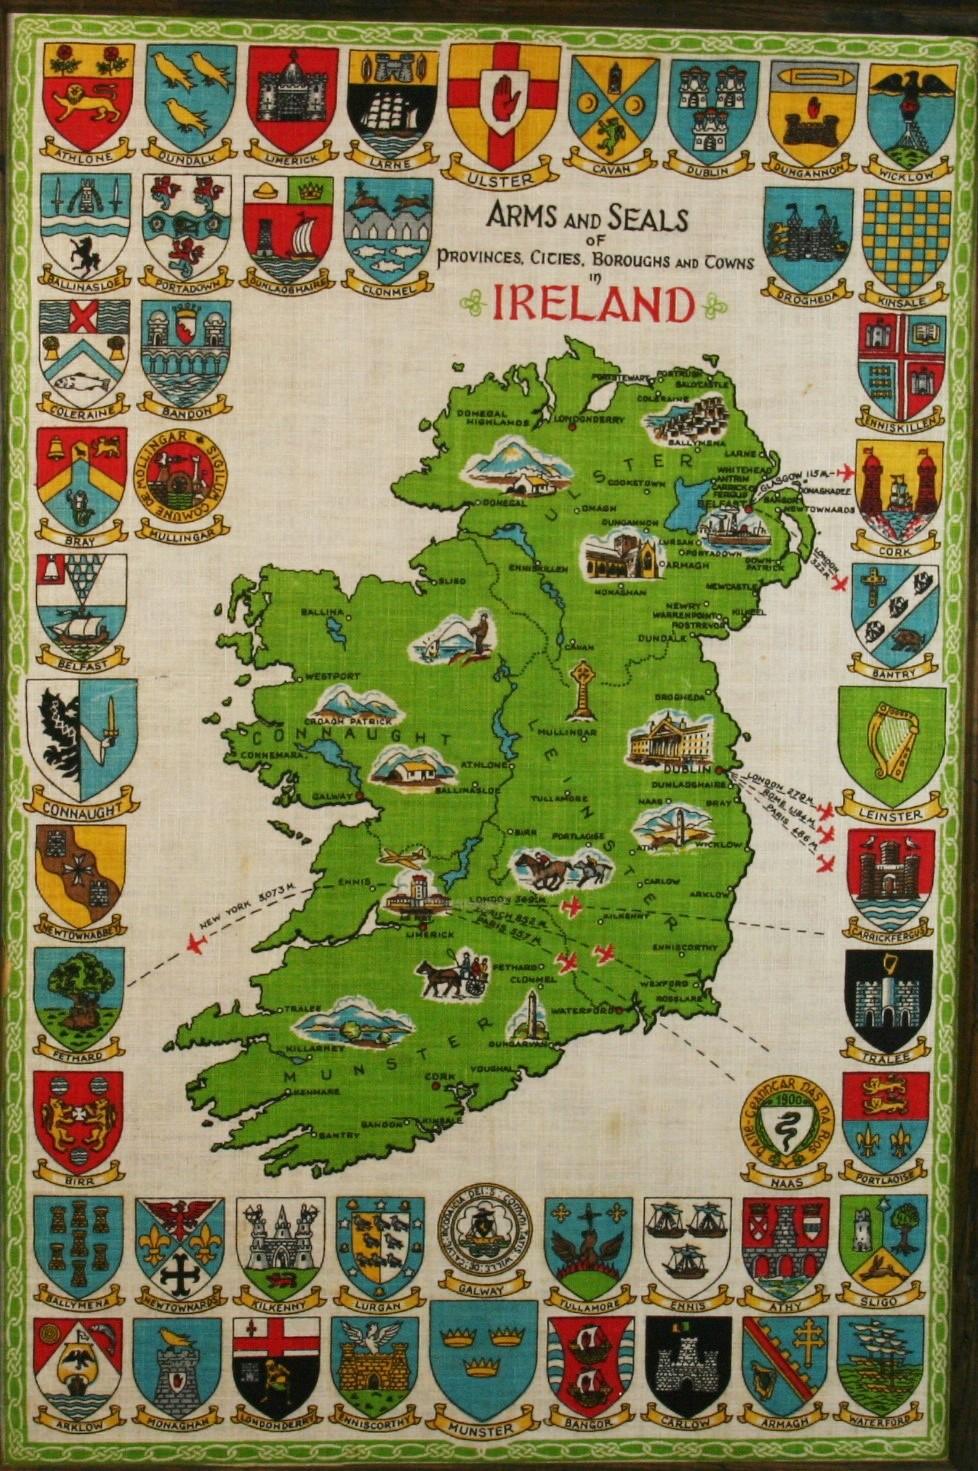 3798 Arms and seals of cities in Ireland landscape on linen